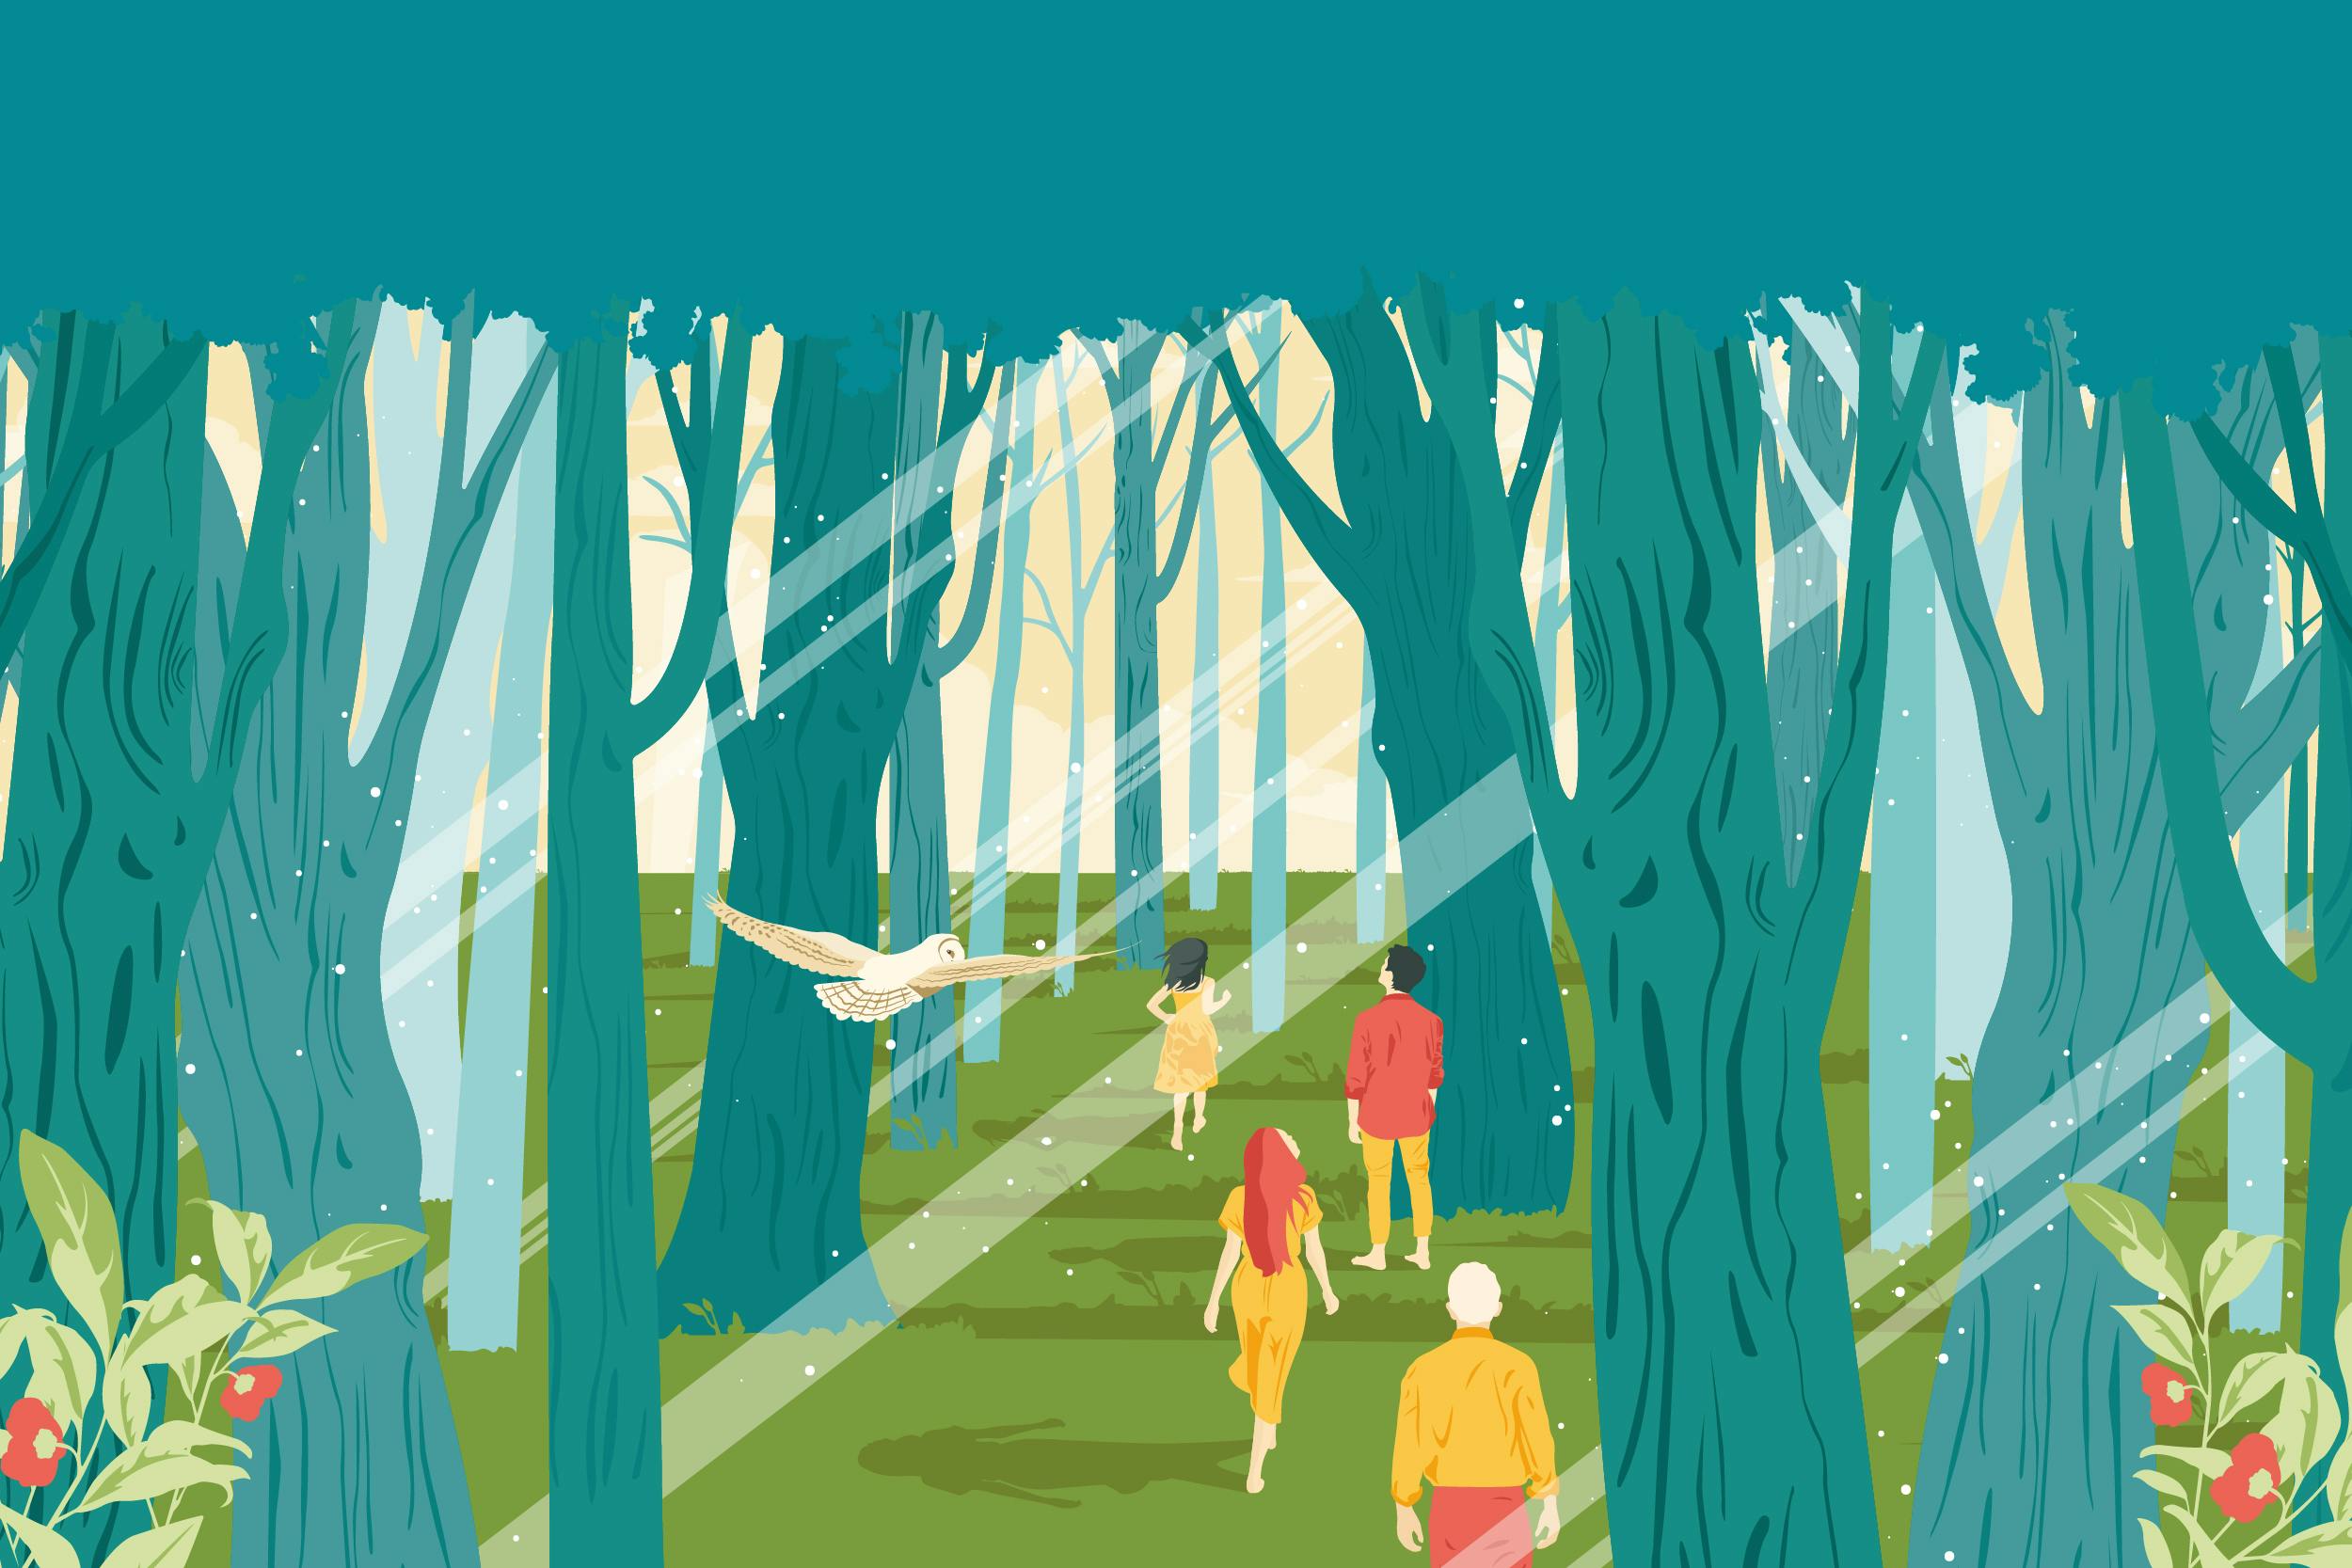 Graphic poster depicting forest with people walking, dominant colors are green and blue